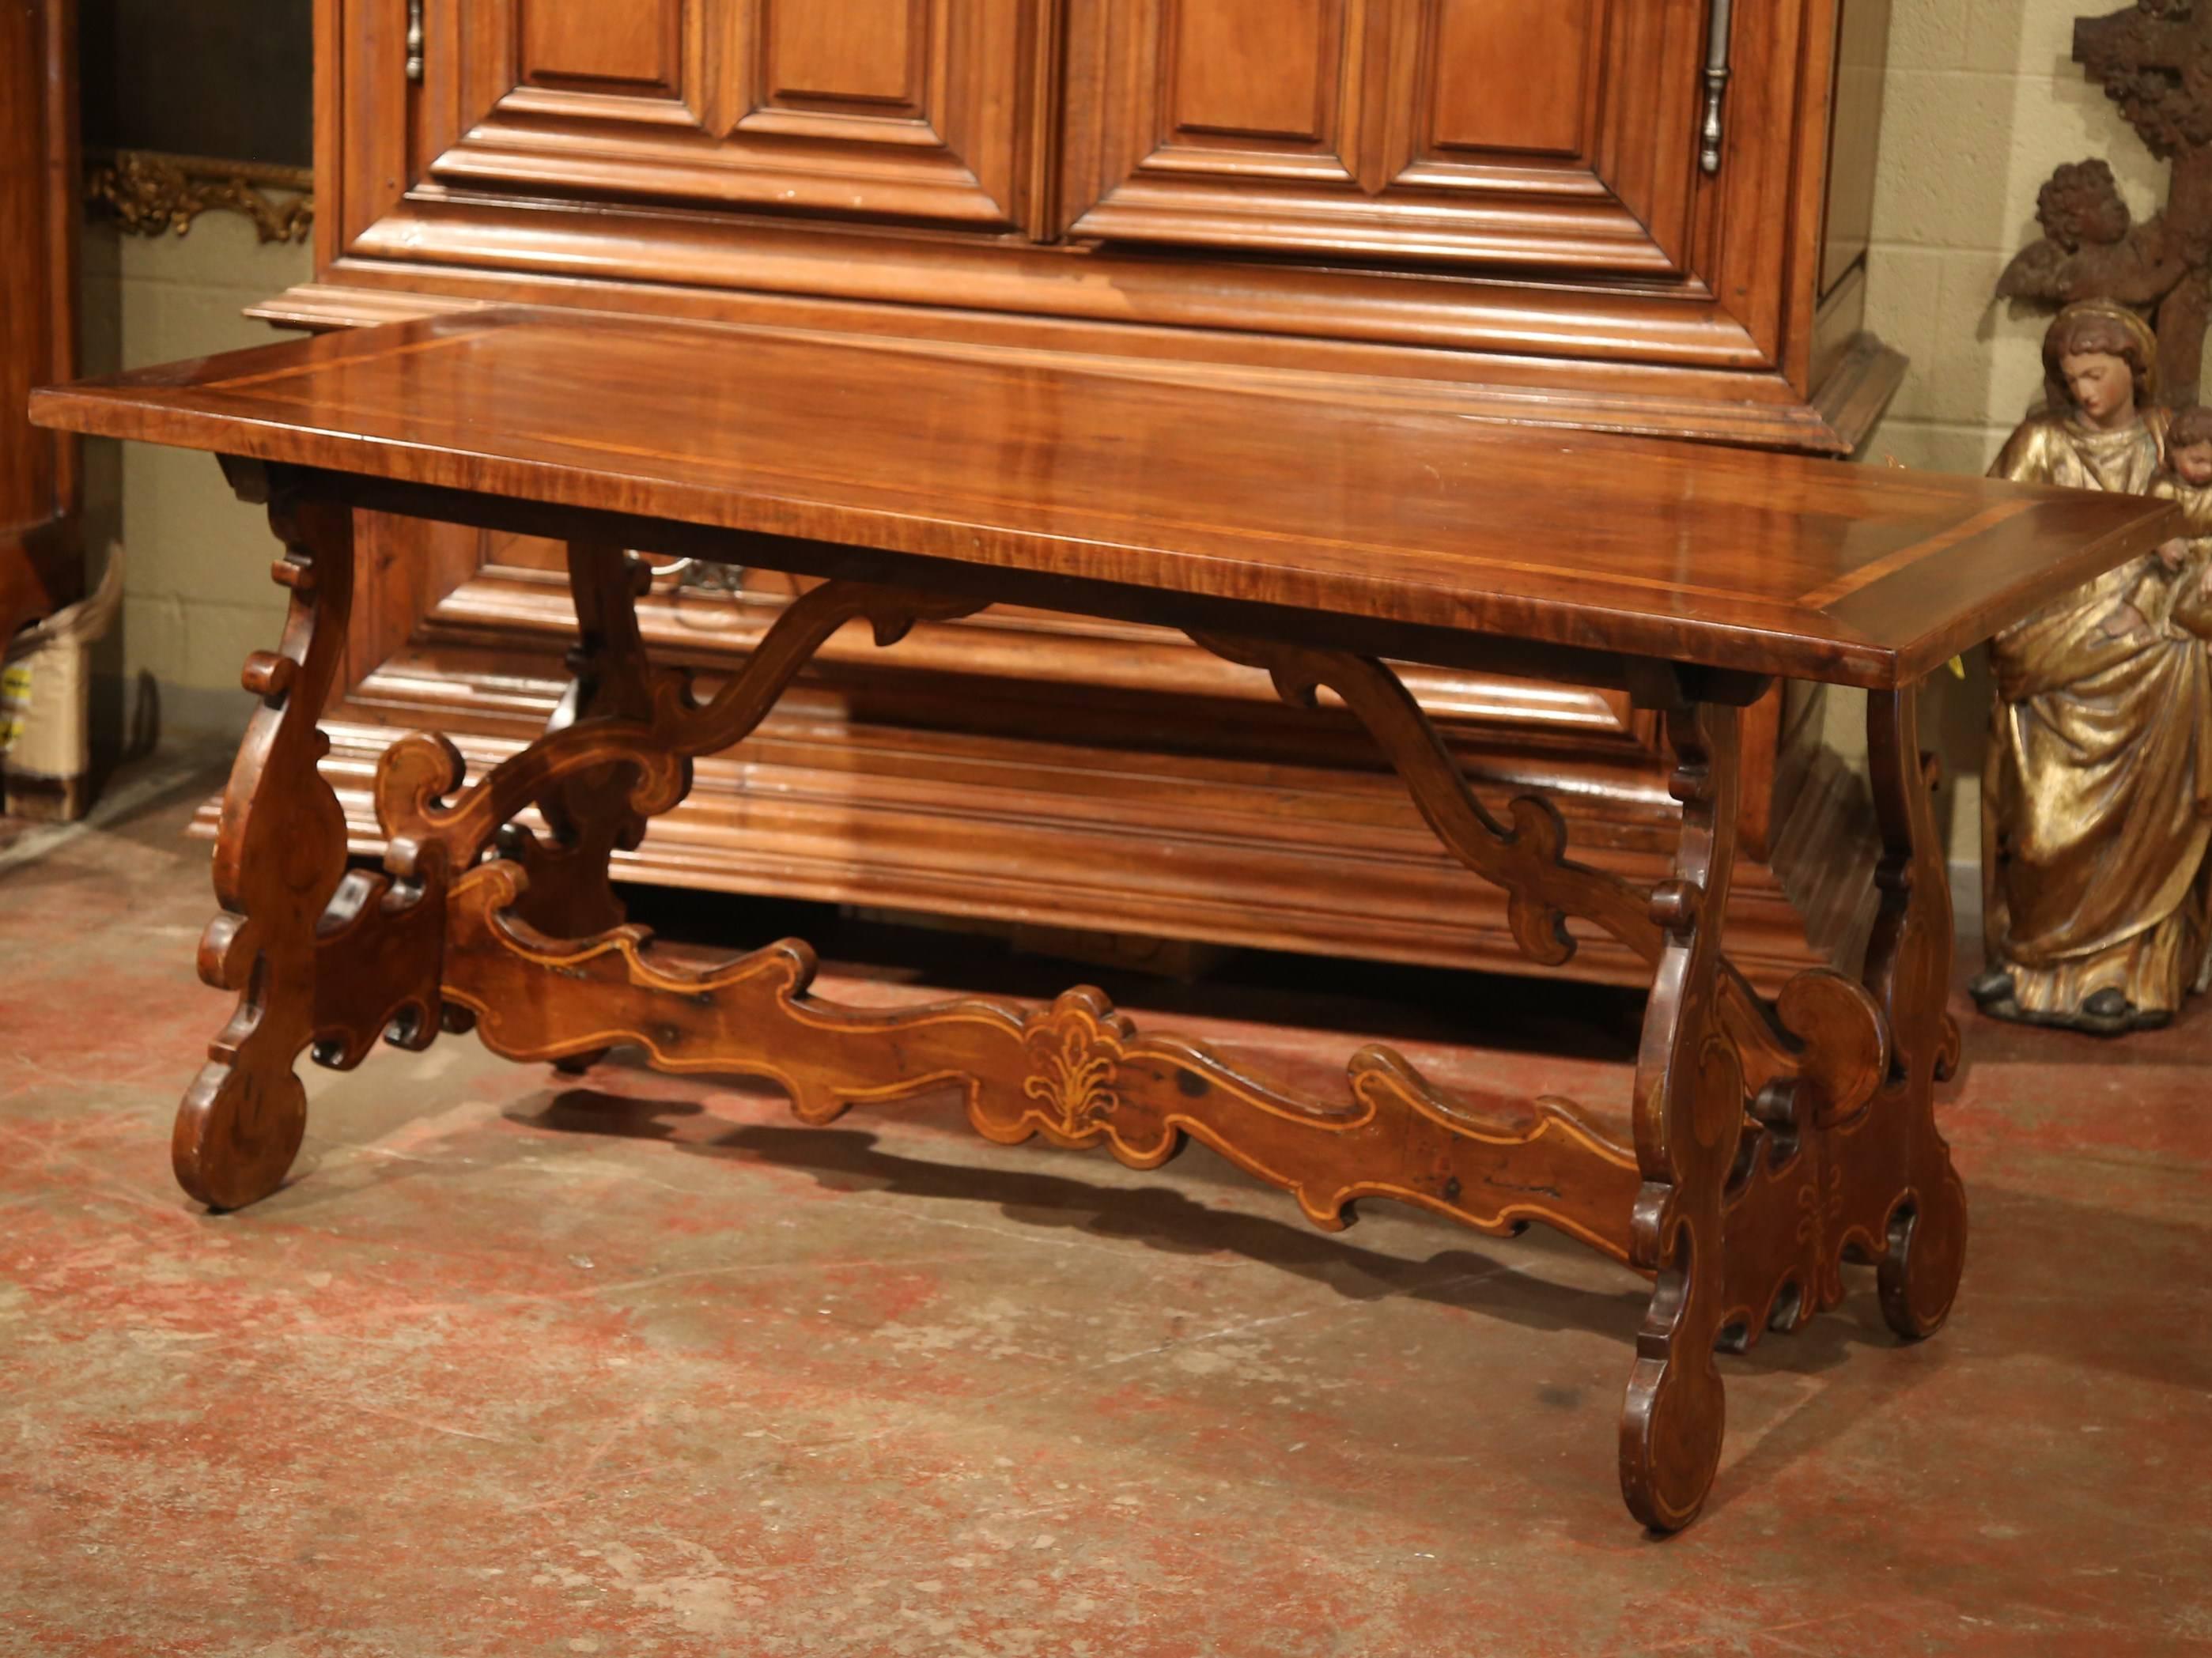 19th Century Italian Carved Walnut Trestle Table with Decorative Inlay Motifs 3